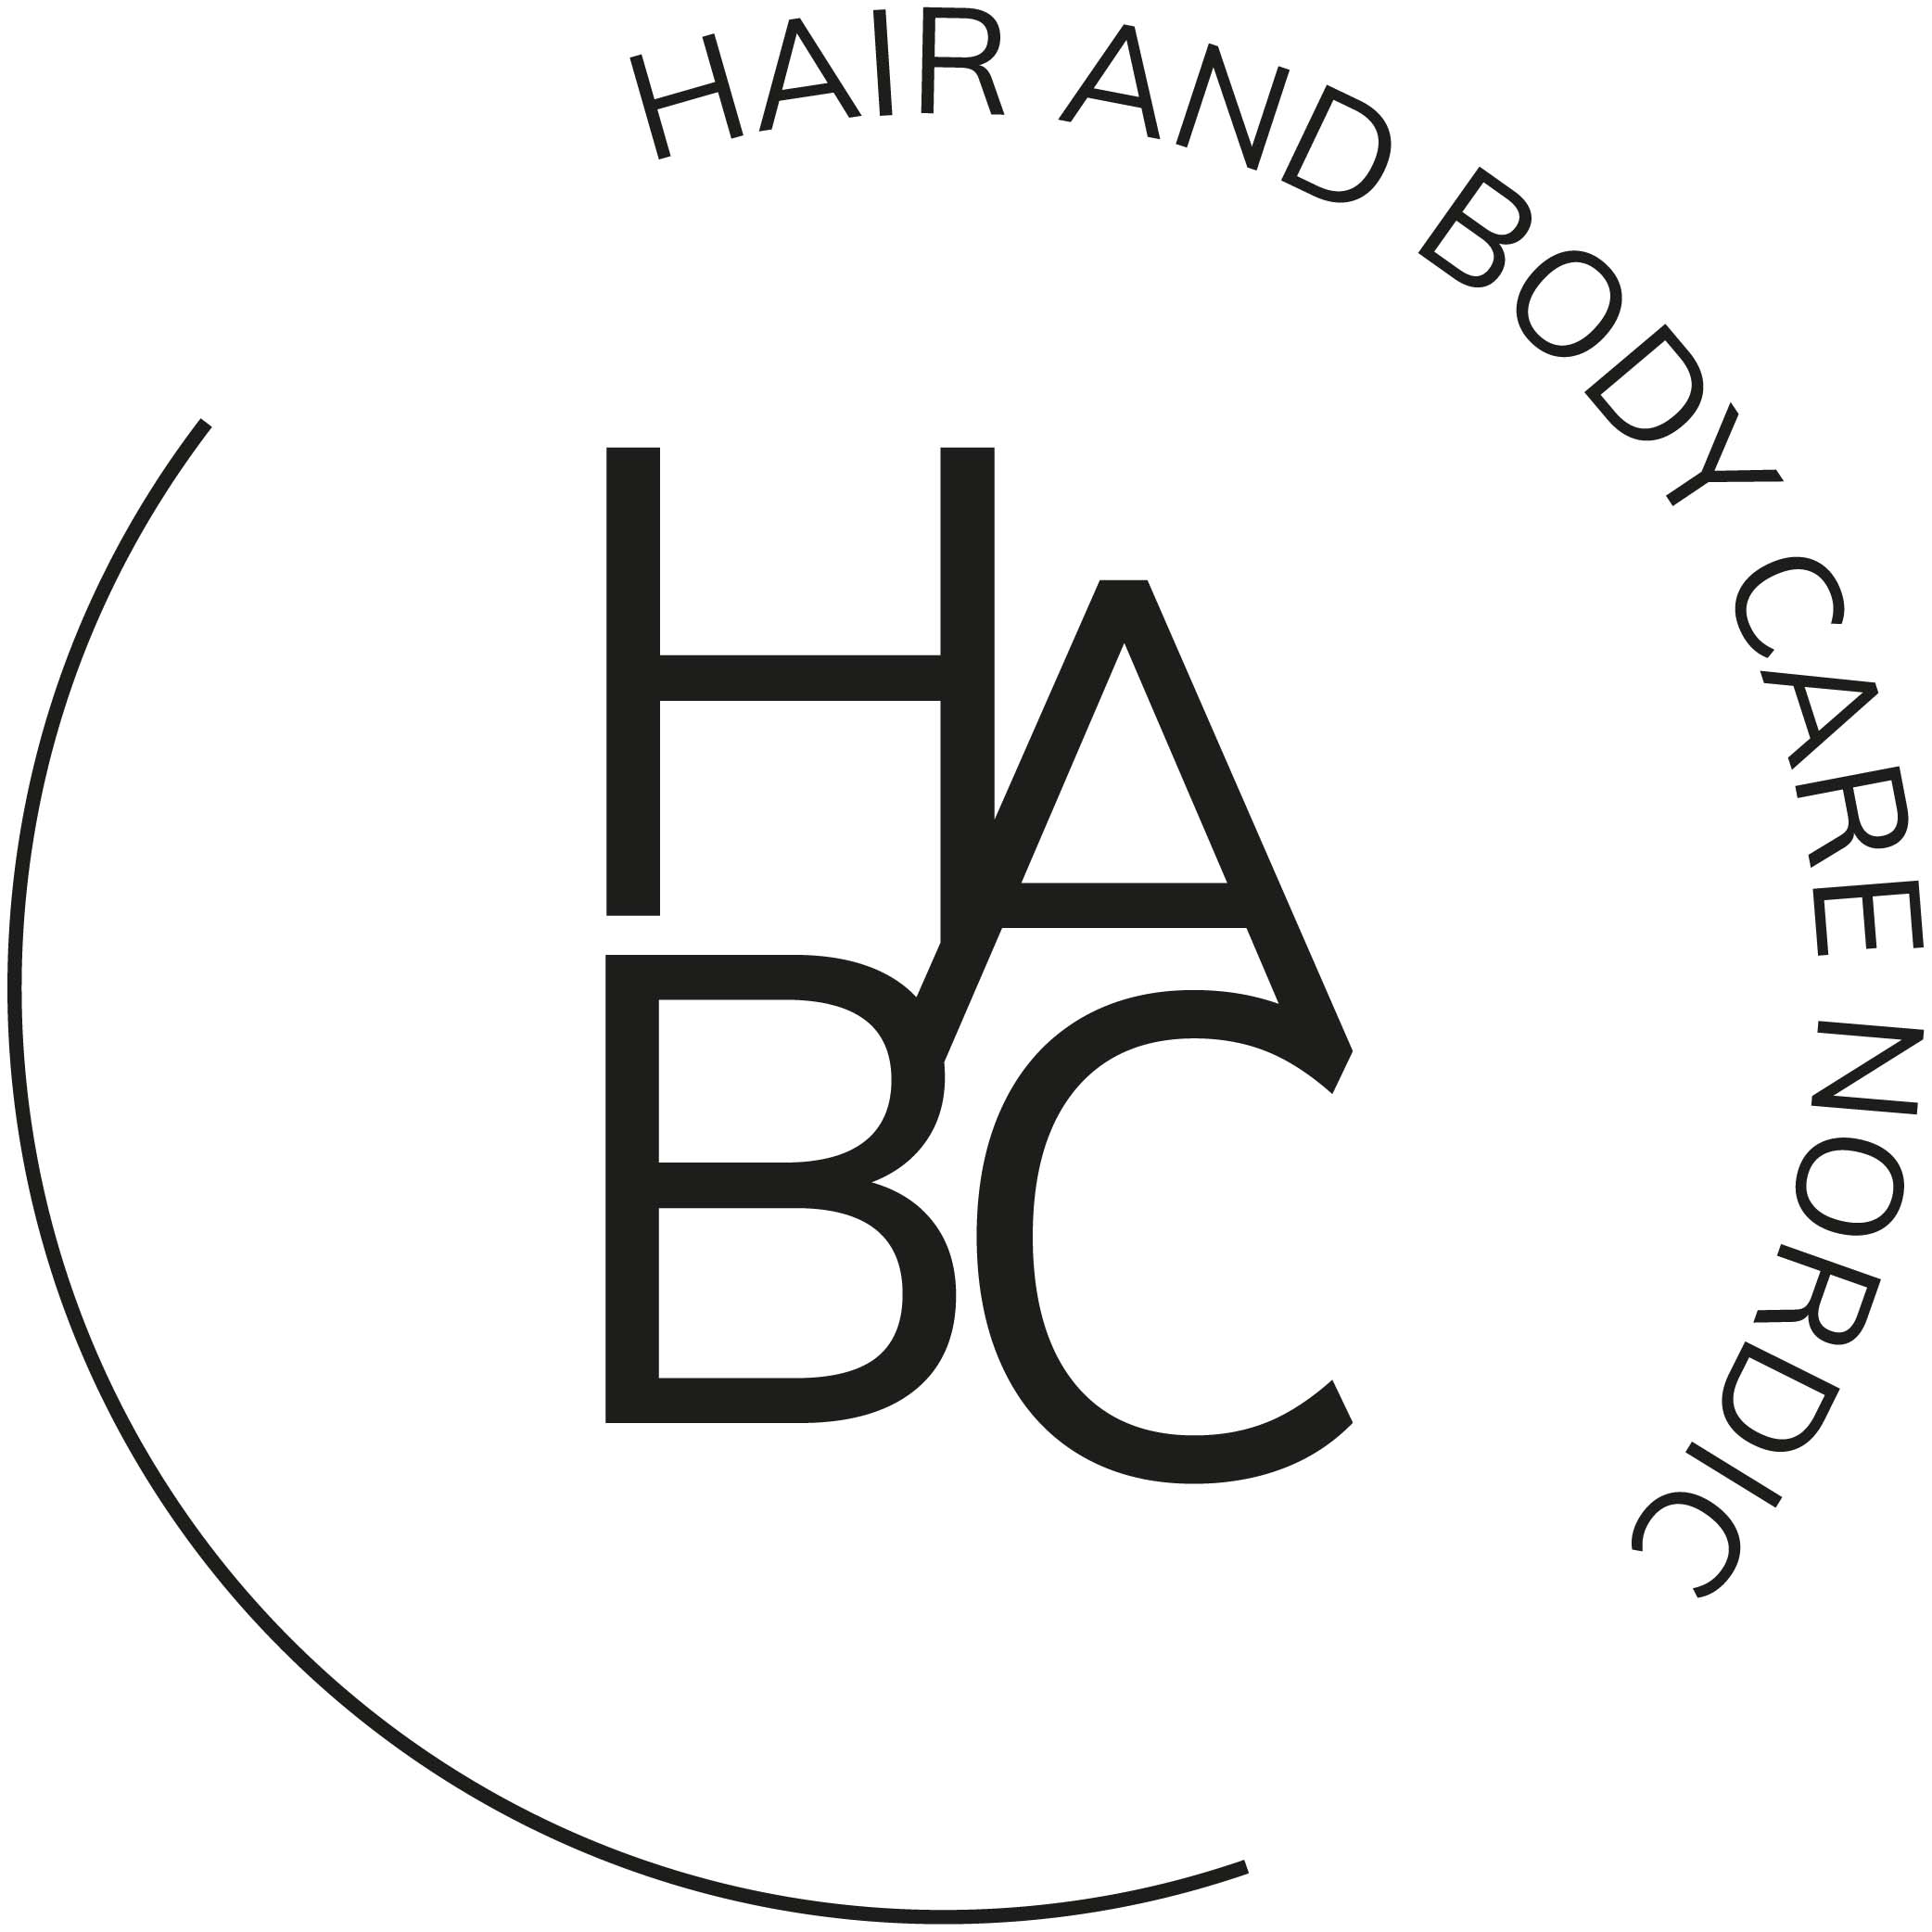 Hair And Body Care nordic